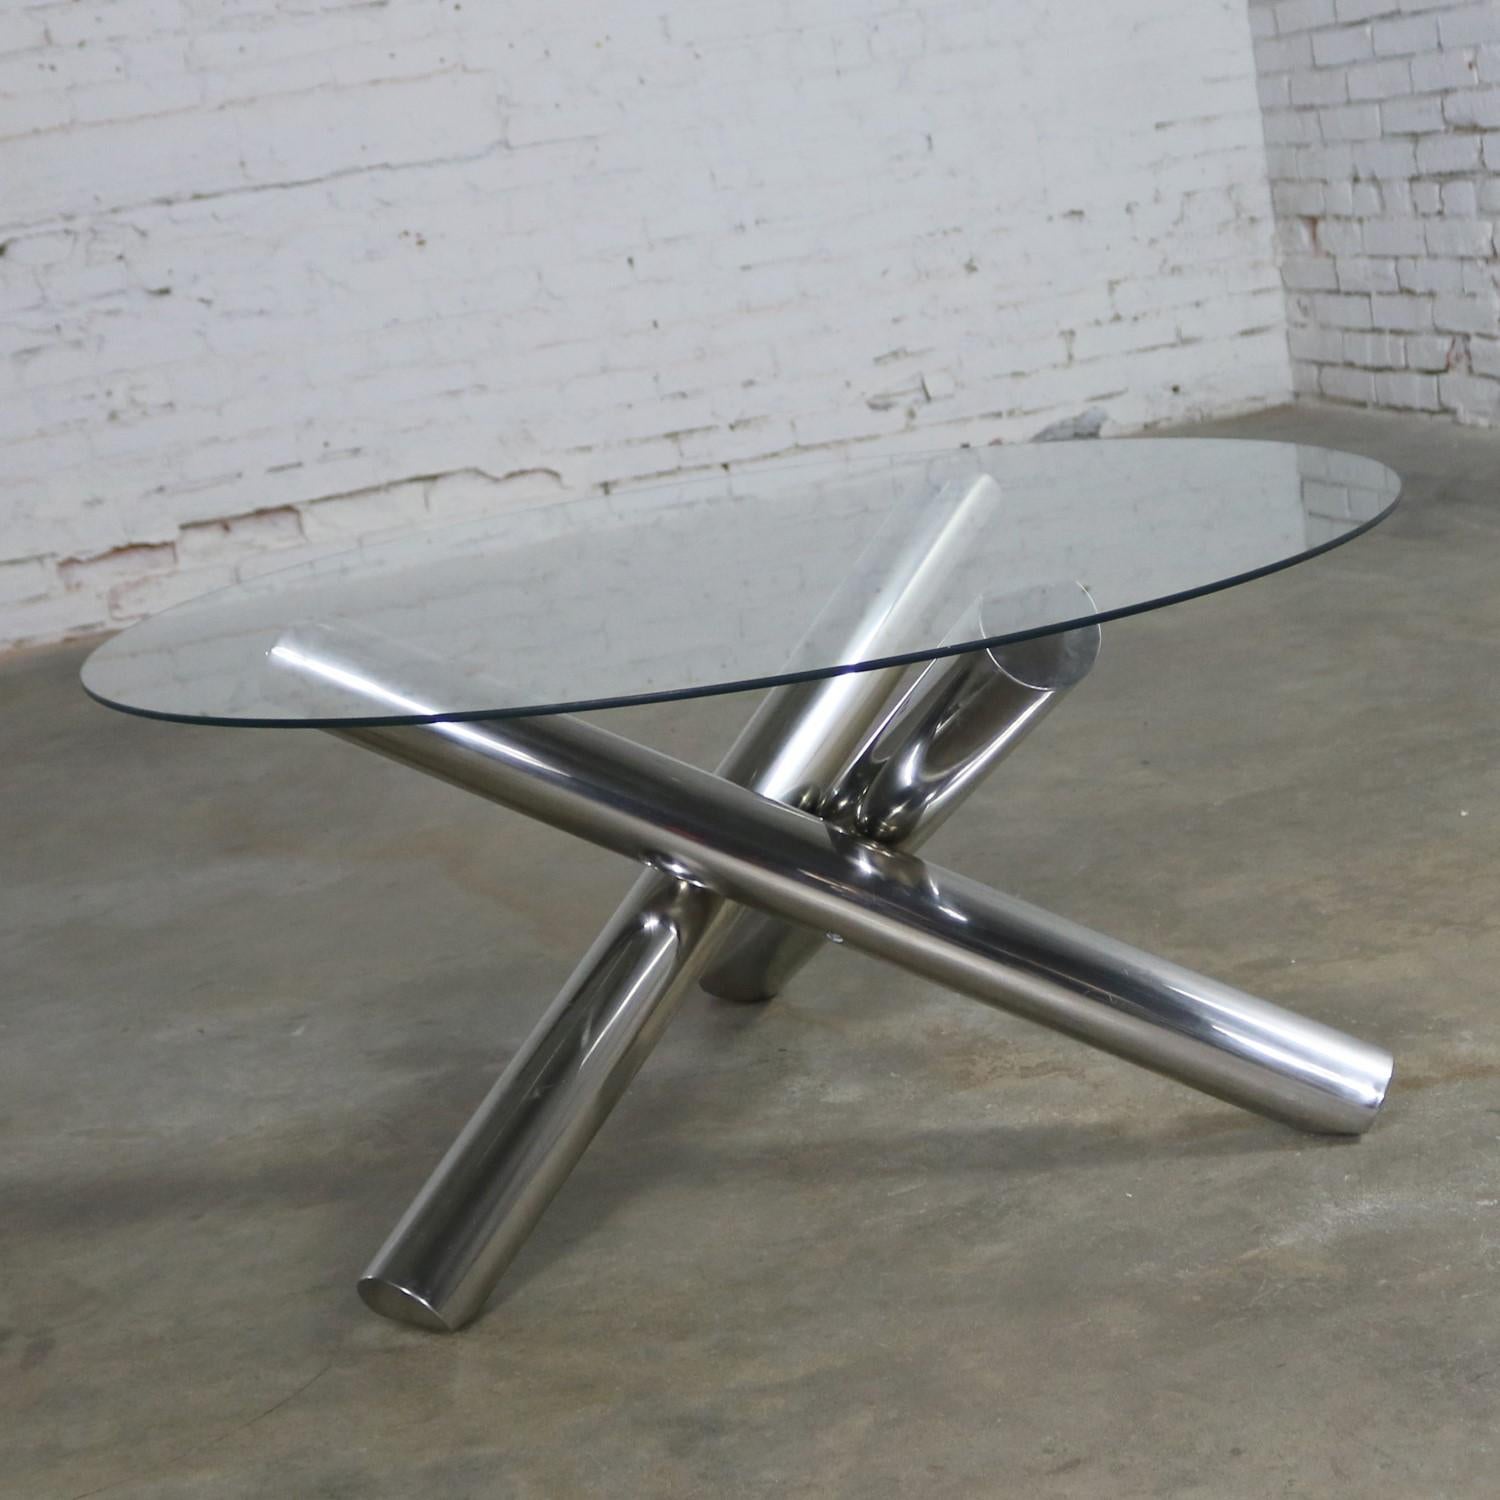 Incredible stainless steel jacks shaped or tripod coffee table with a round glass top. It is in wonderful vintage condition. It does have a visible scrape on one of the legs, but you must look for it and it does not detract from its beauty. Please